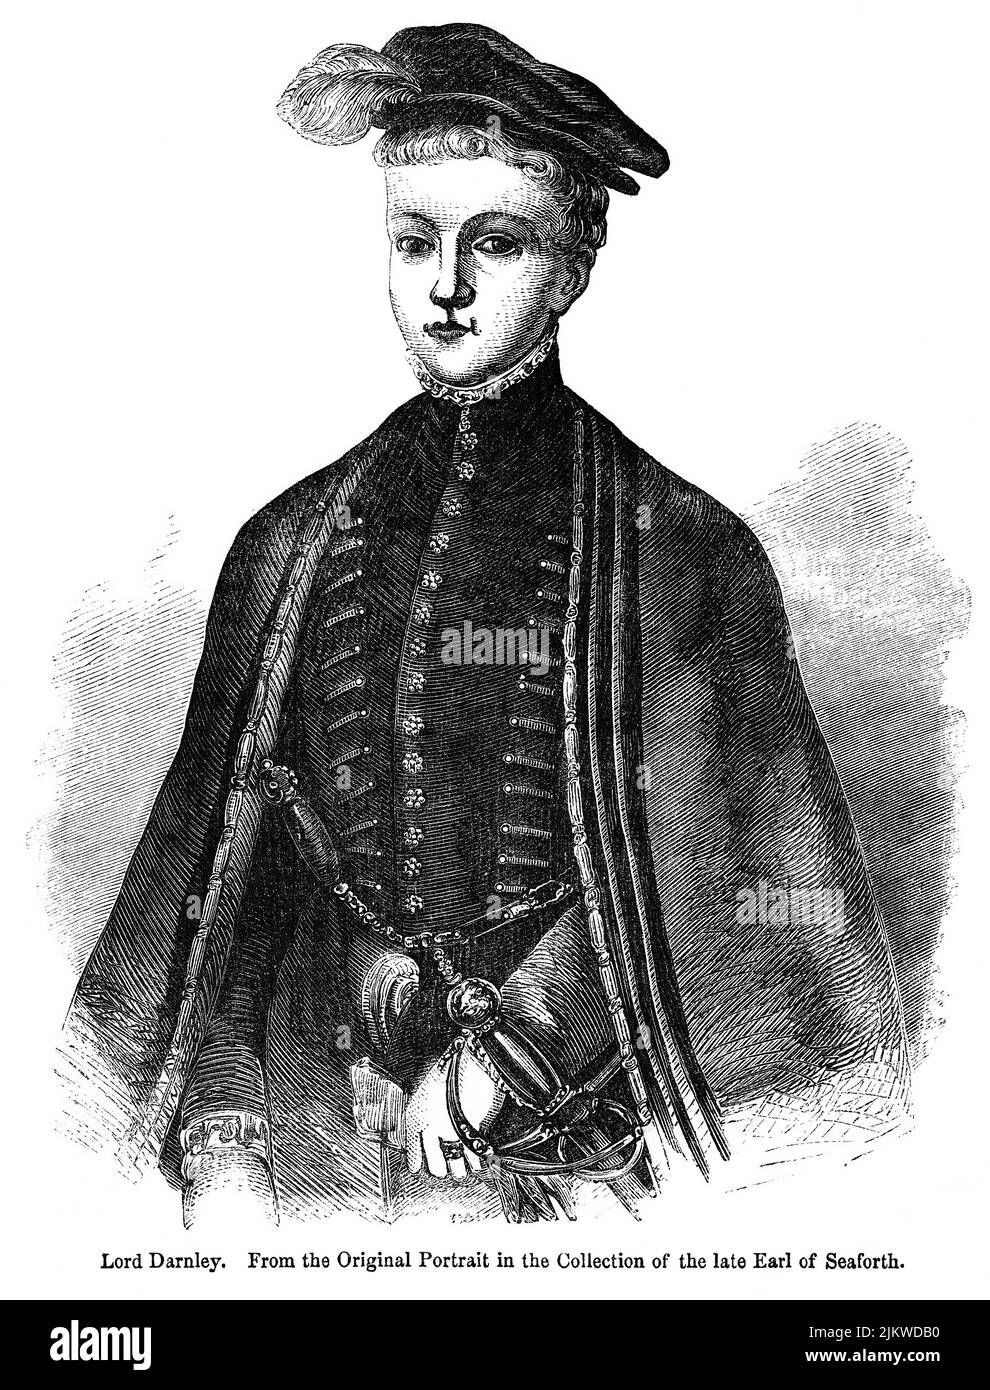 Lord Darnley. From the Original Portrait in the Collection of the Earl of Seaforth, Illustration from the Book, 'John Cassel’s Illustrated History of England, Volume II', text by William Howitt, Cassell, Petter, and Galpin, London, 1858 Stock Photo